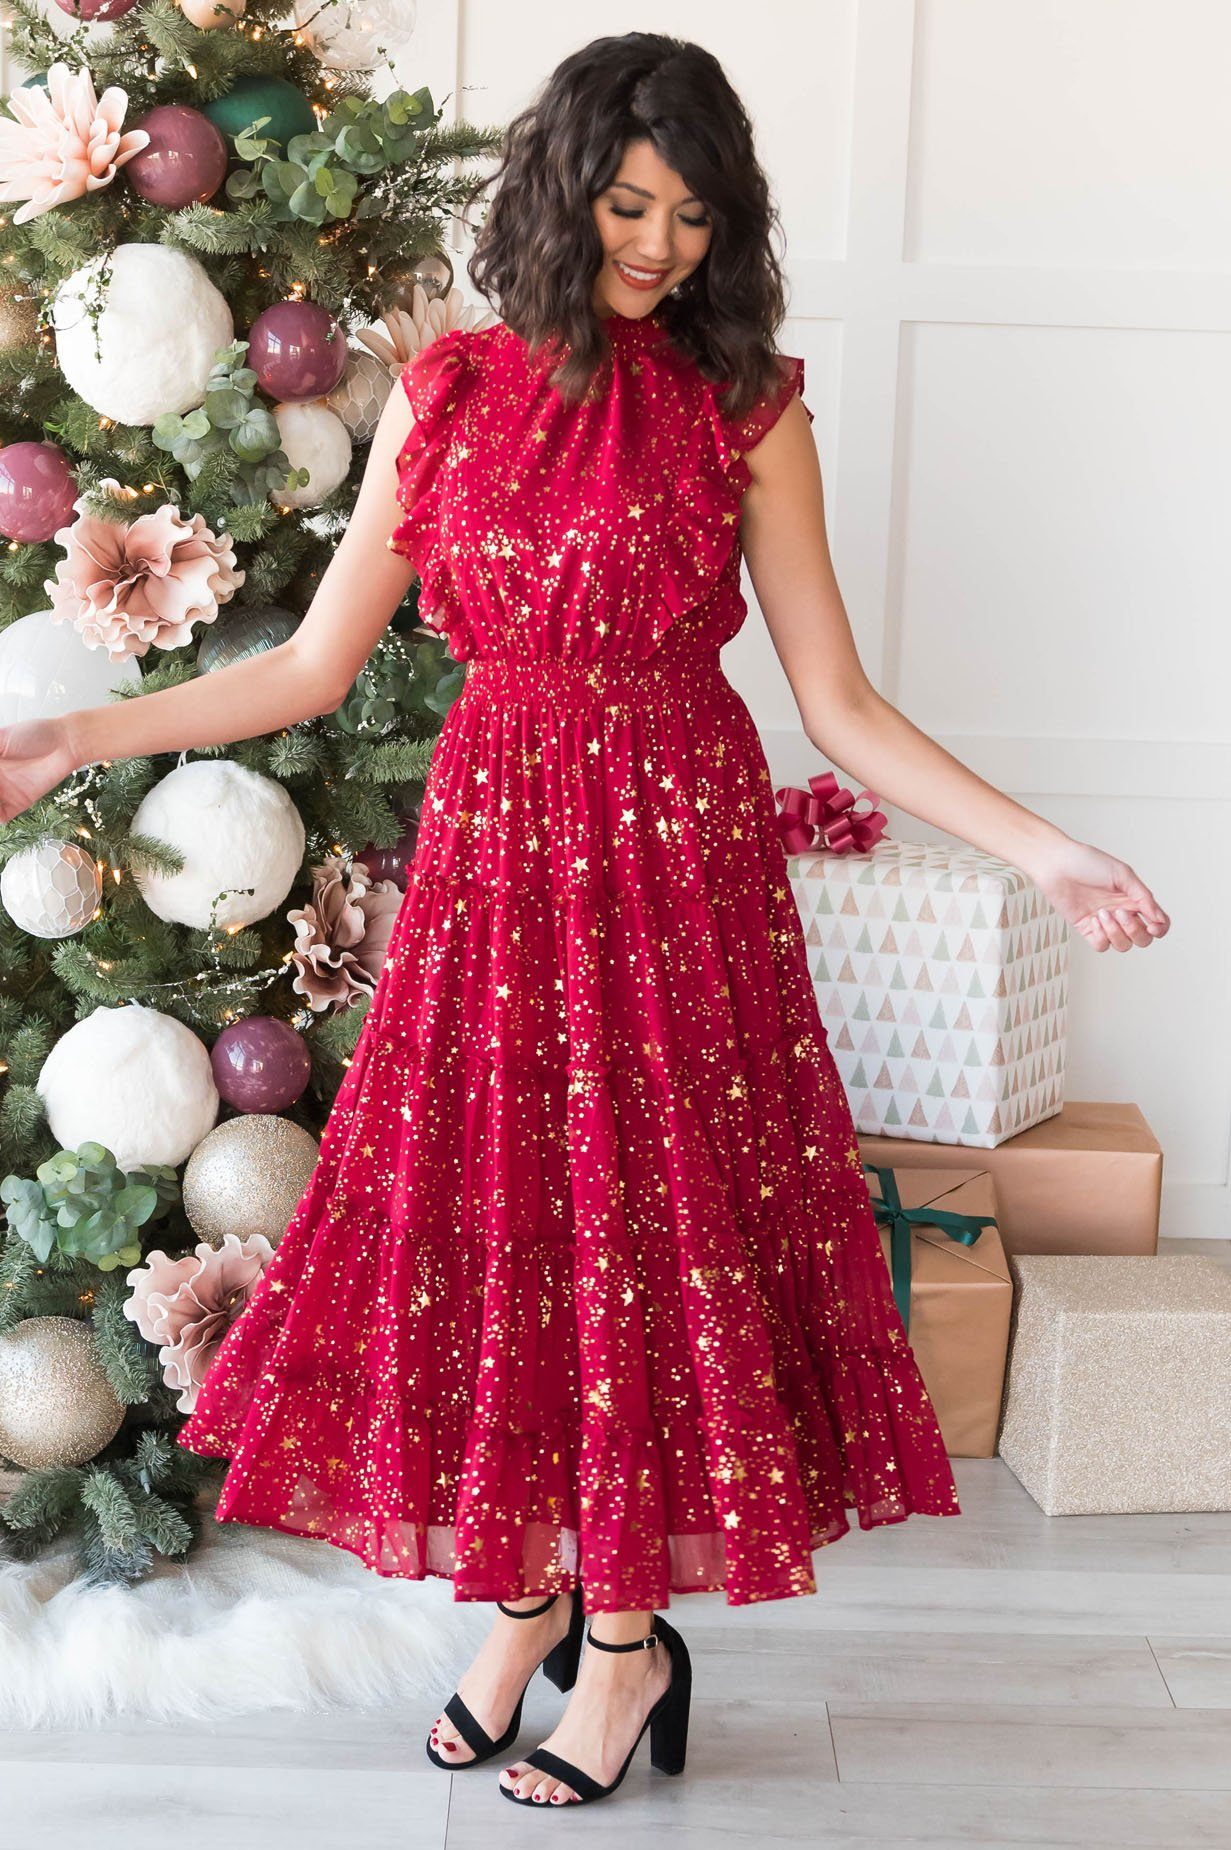 9 Chic Modest Holiday Outfits To Try Out  Christmas fashion outfits,  Christmas outfits women, Classy christmas dresses